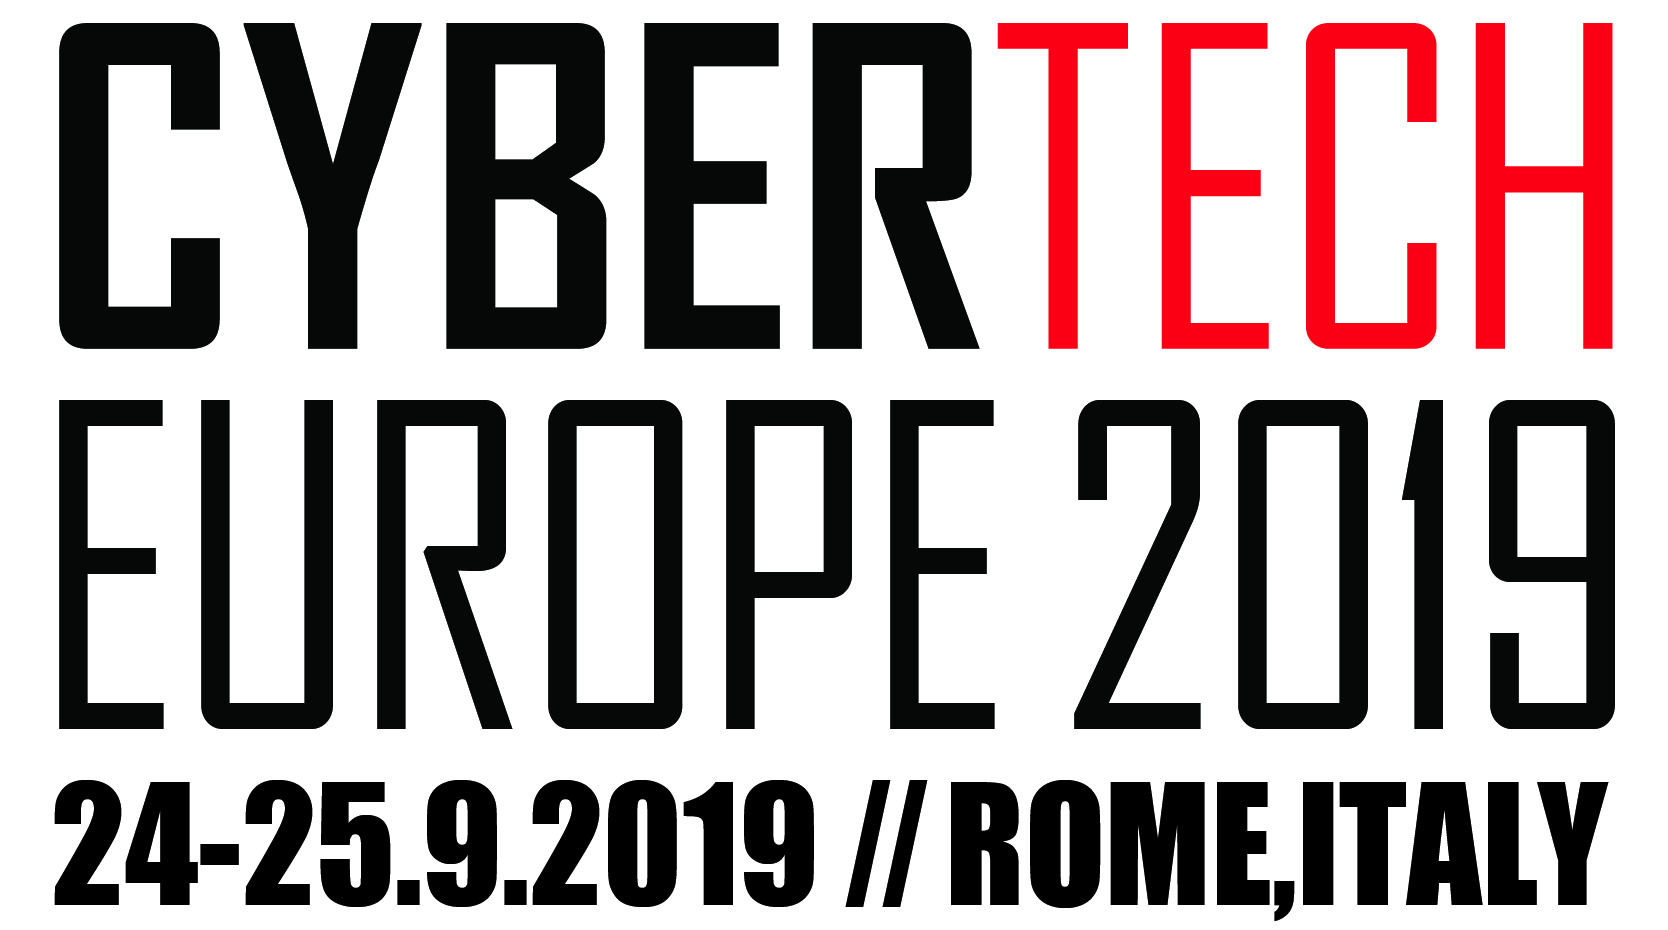 CYBERTECH AND SPAZIO-NEWS ARE PROUD TO ANNOUNCE A MEDIA PARTNERSHIP FOR CYBERTECH EUROPE 2019 